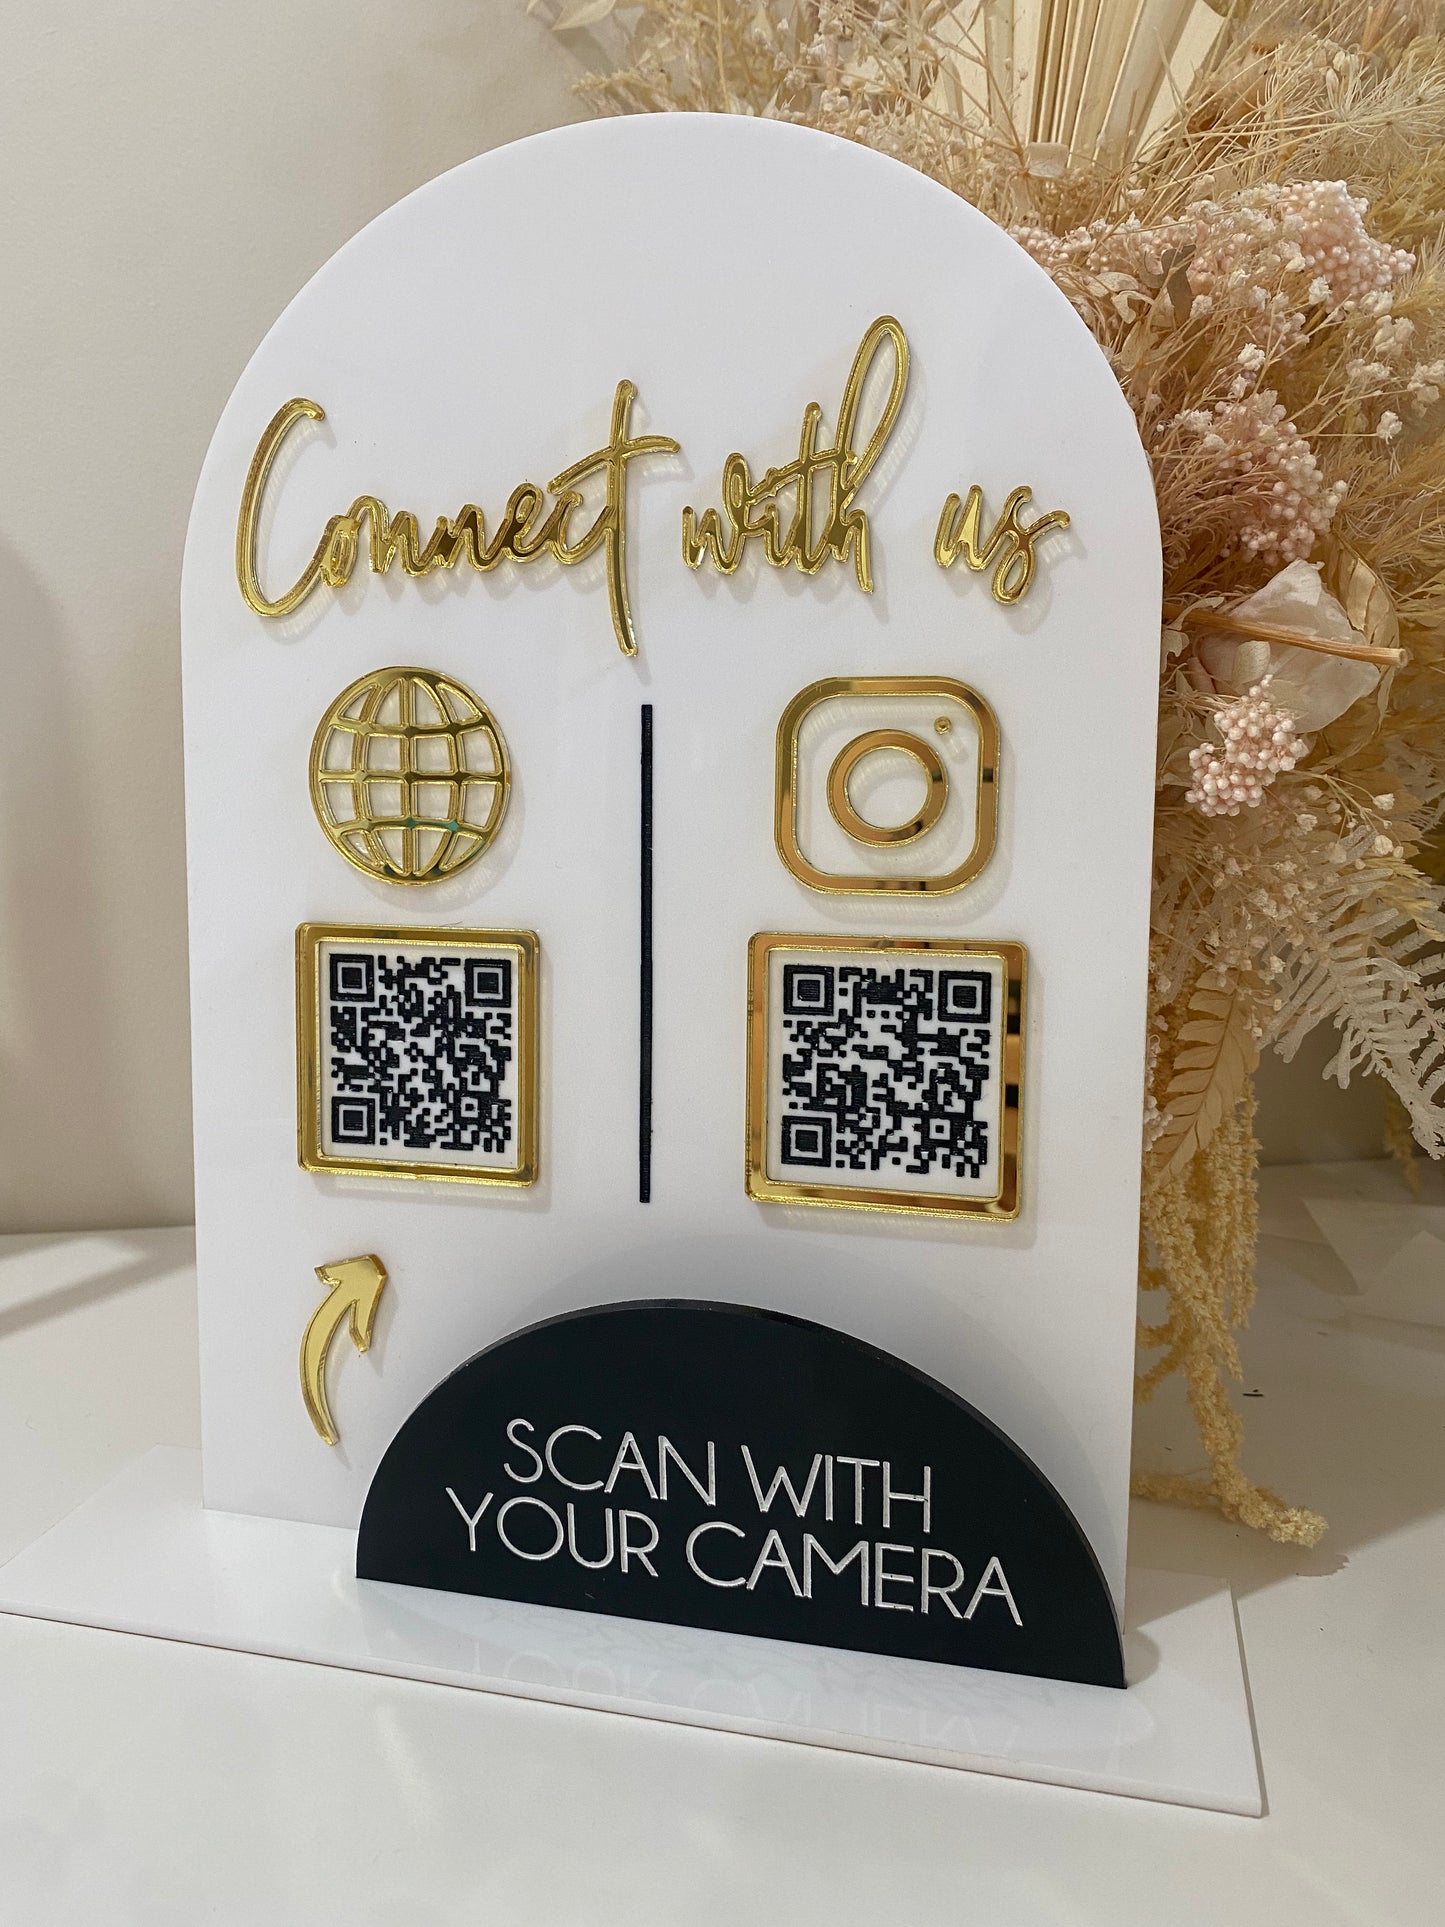 Acrylic 'Connect With Us' Luxe Business QR Code Social Media Signage